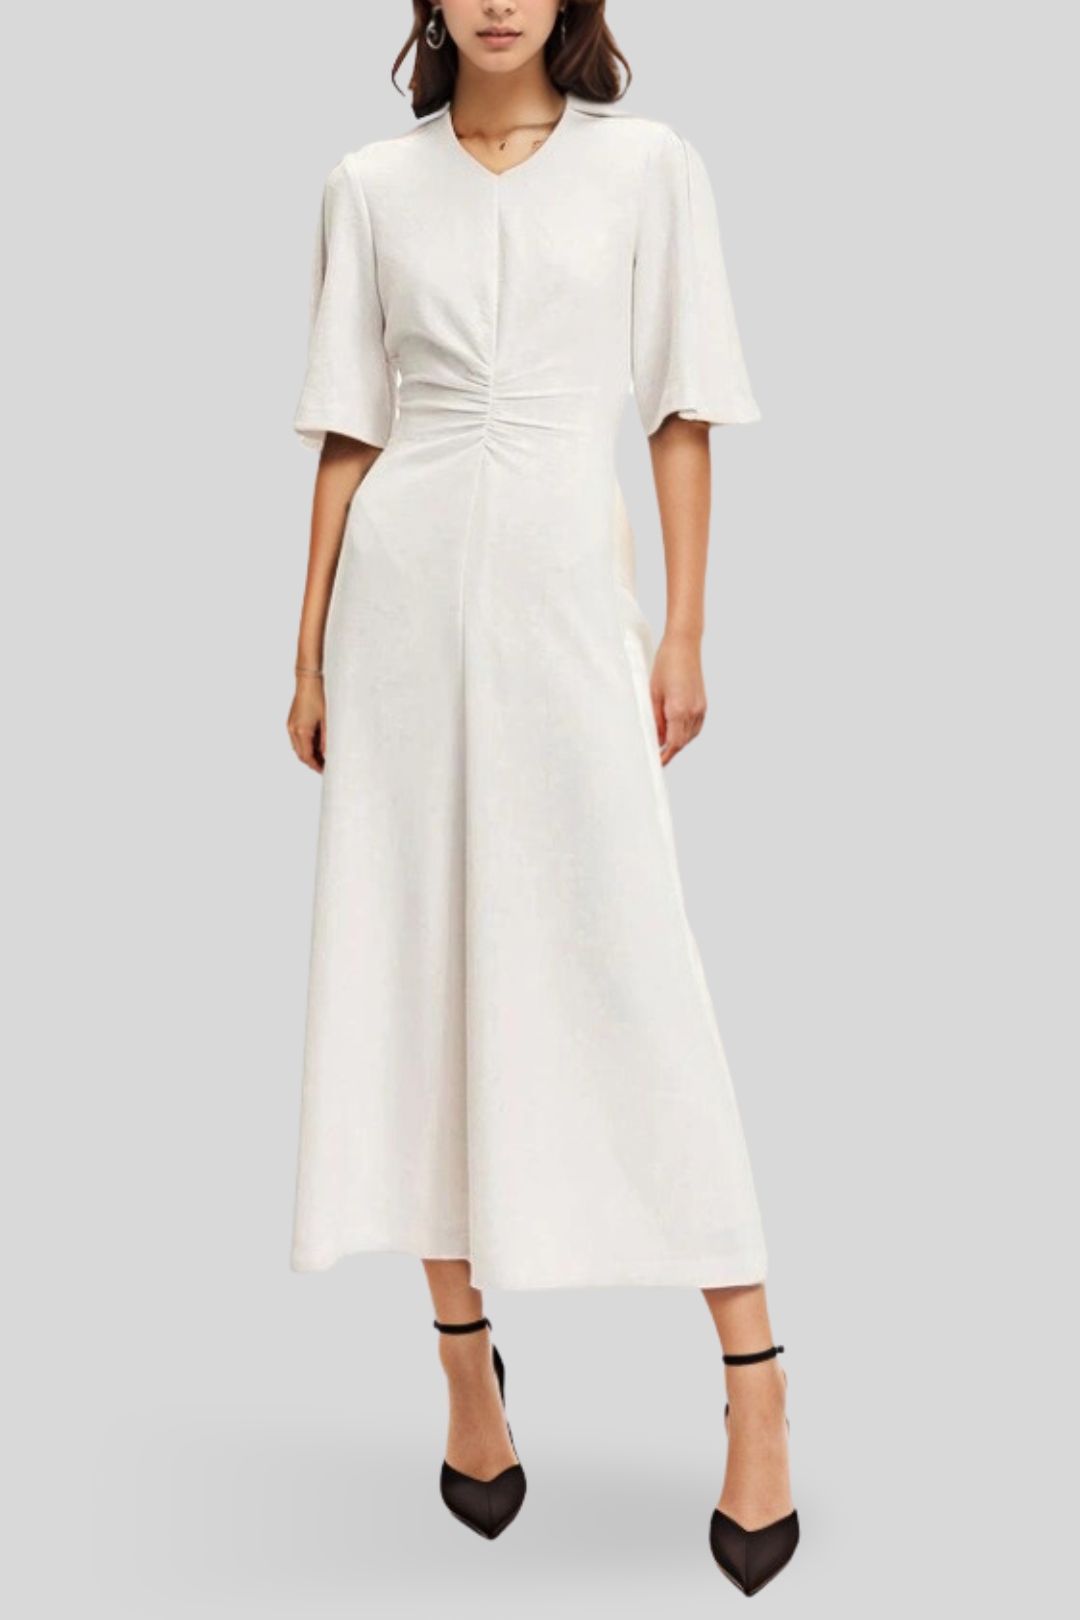 CUE - Ruched Front Midi Dress